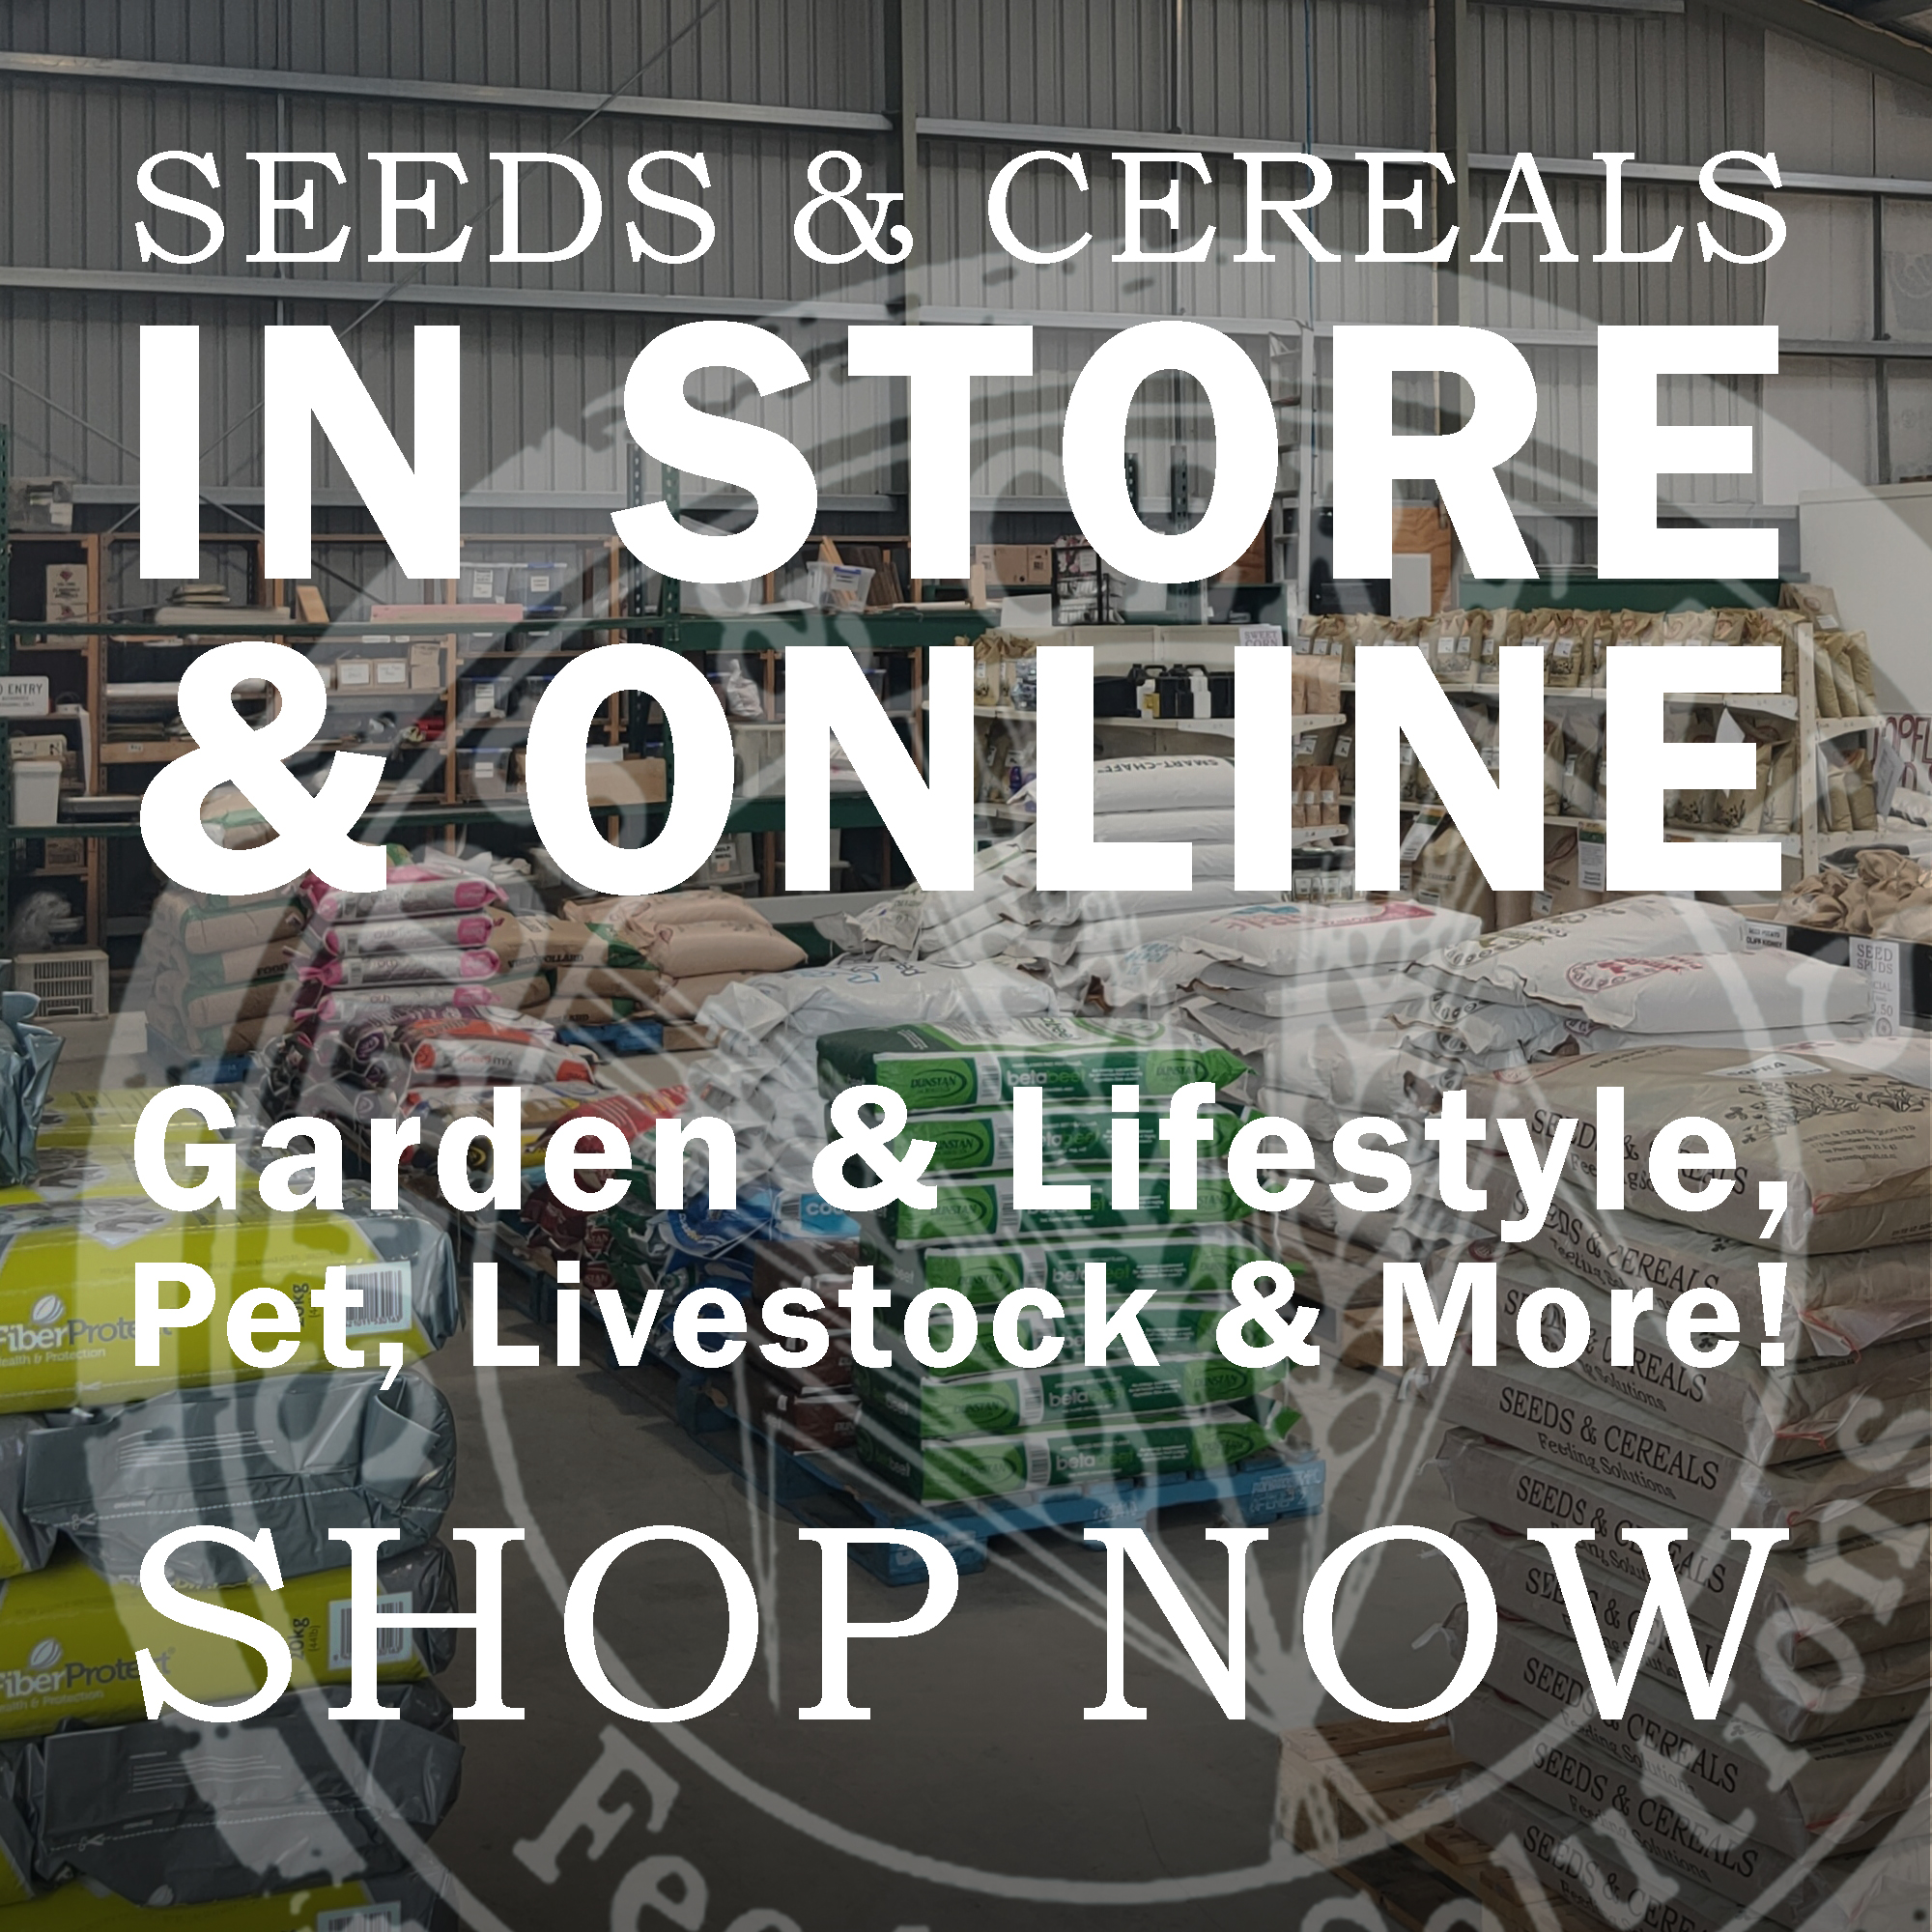 Seeds and Cereals Services